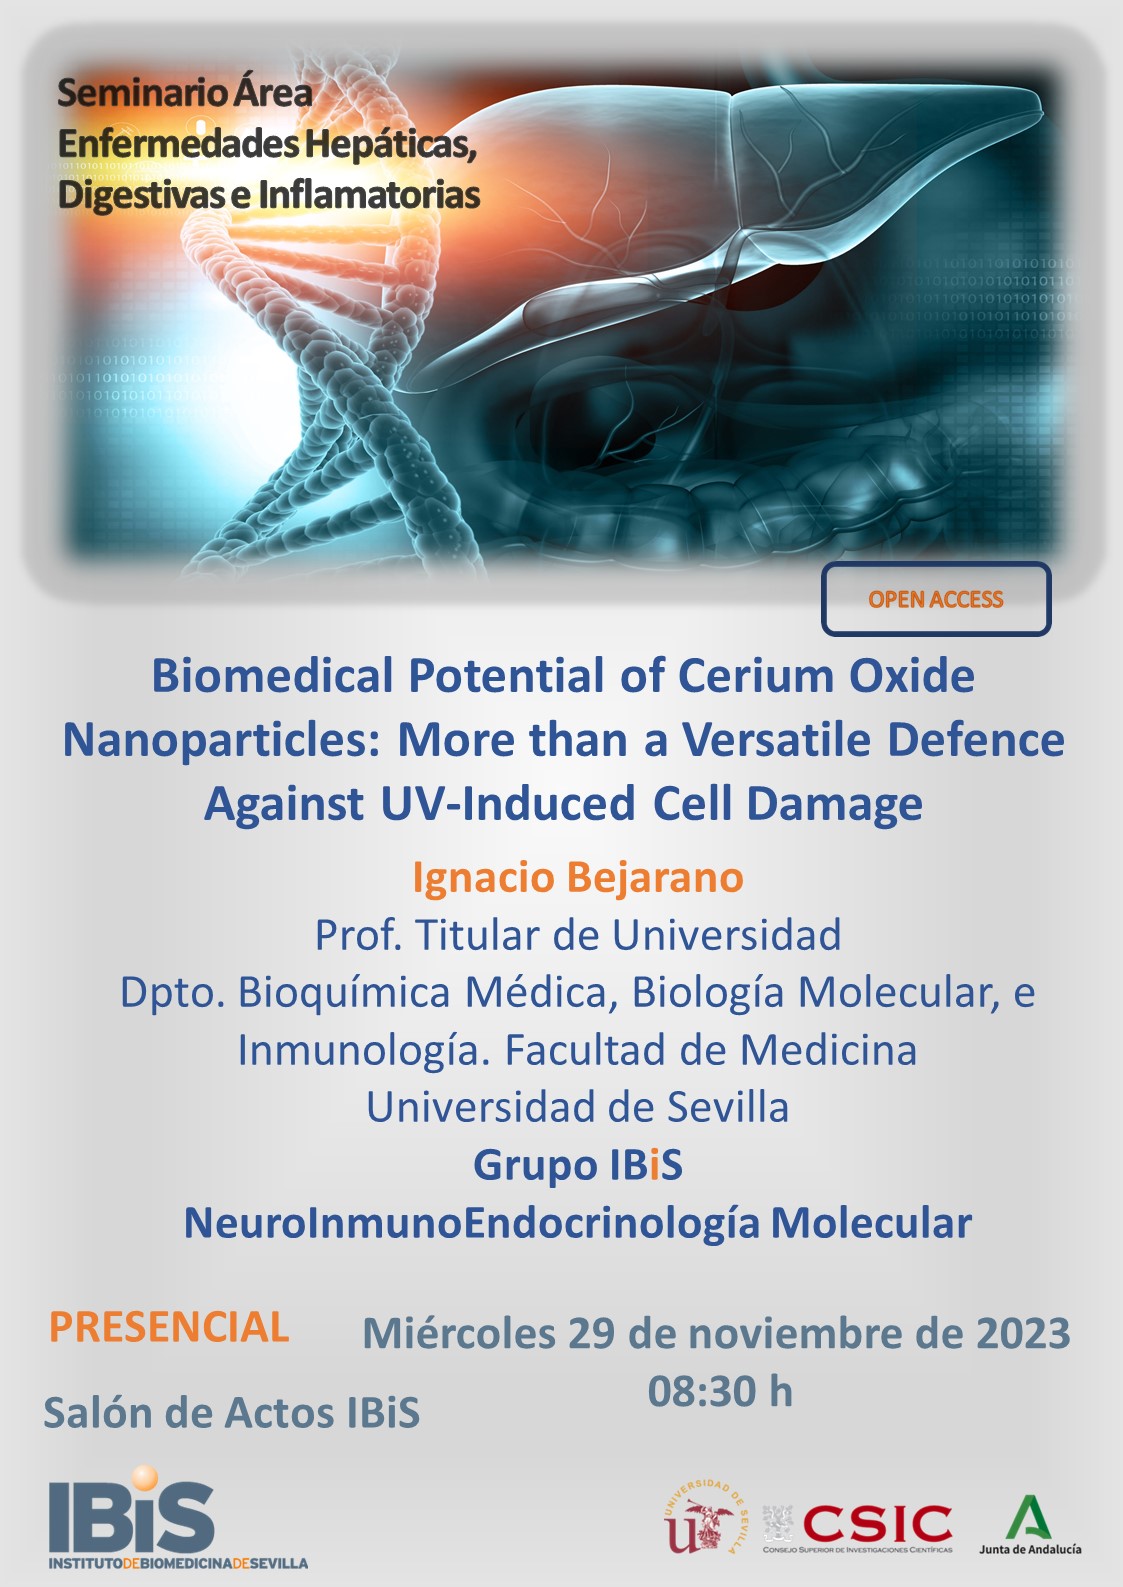 Poster: Biomedical Potential of Cerium Oxide Nanoparticles: More than a Versatile Defence Against UV-Induced Cell Damage